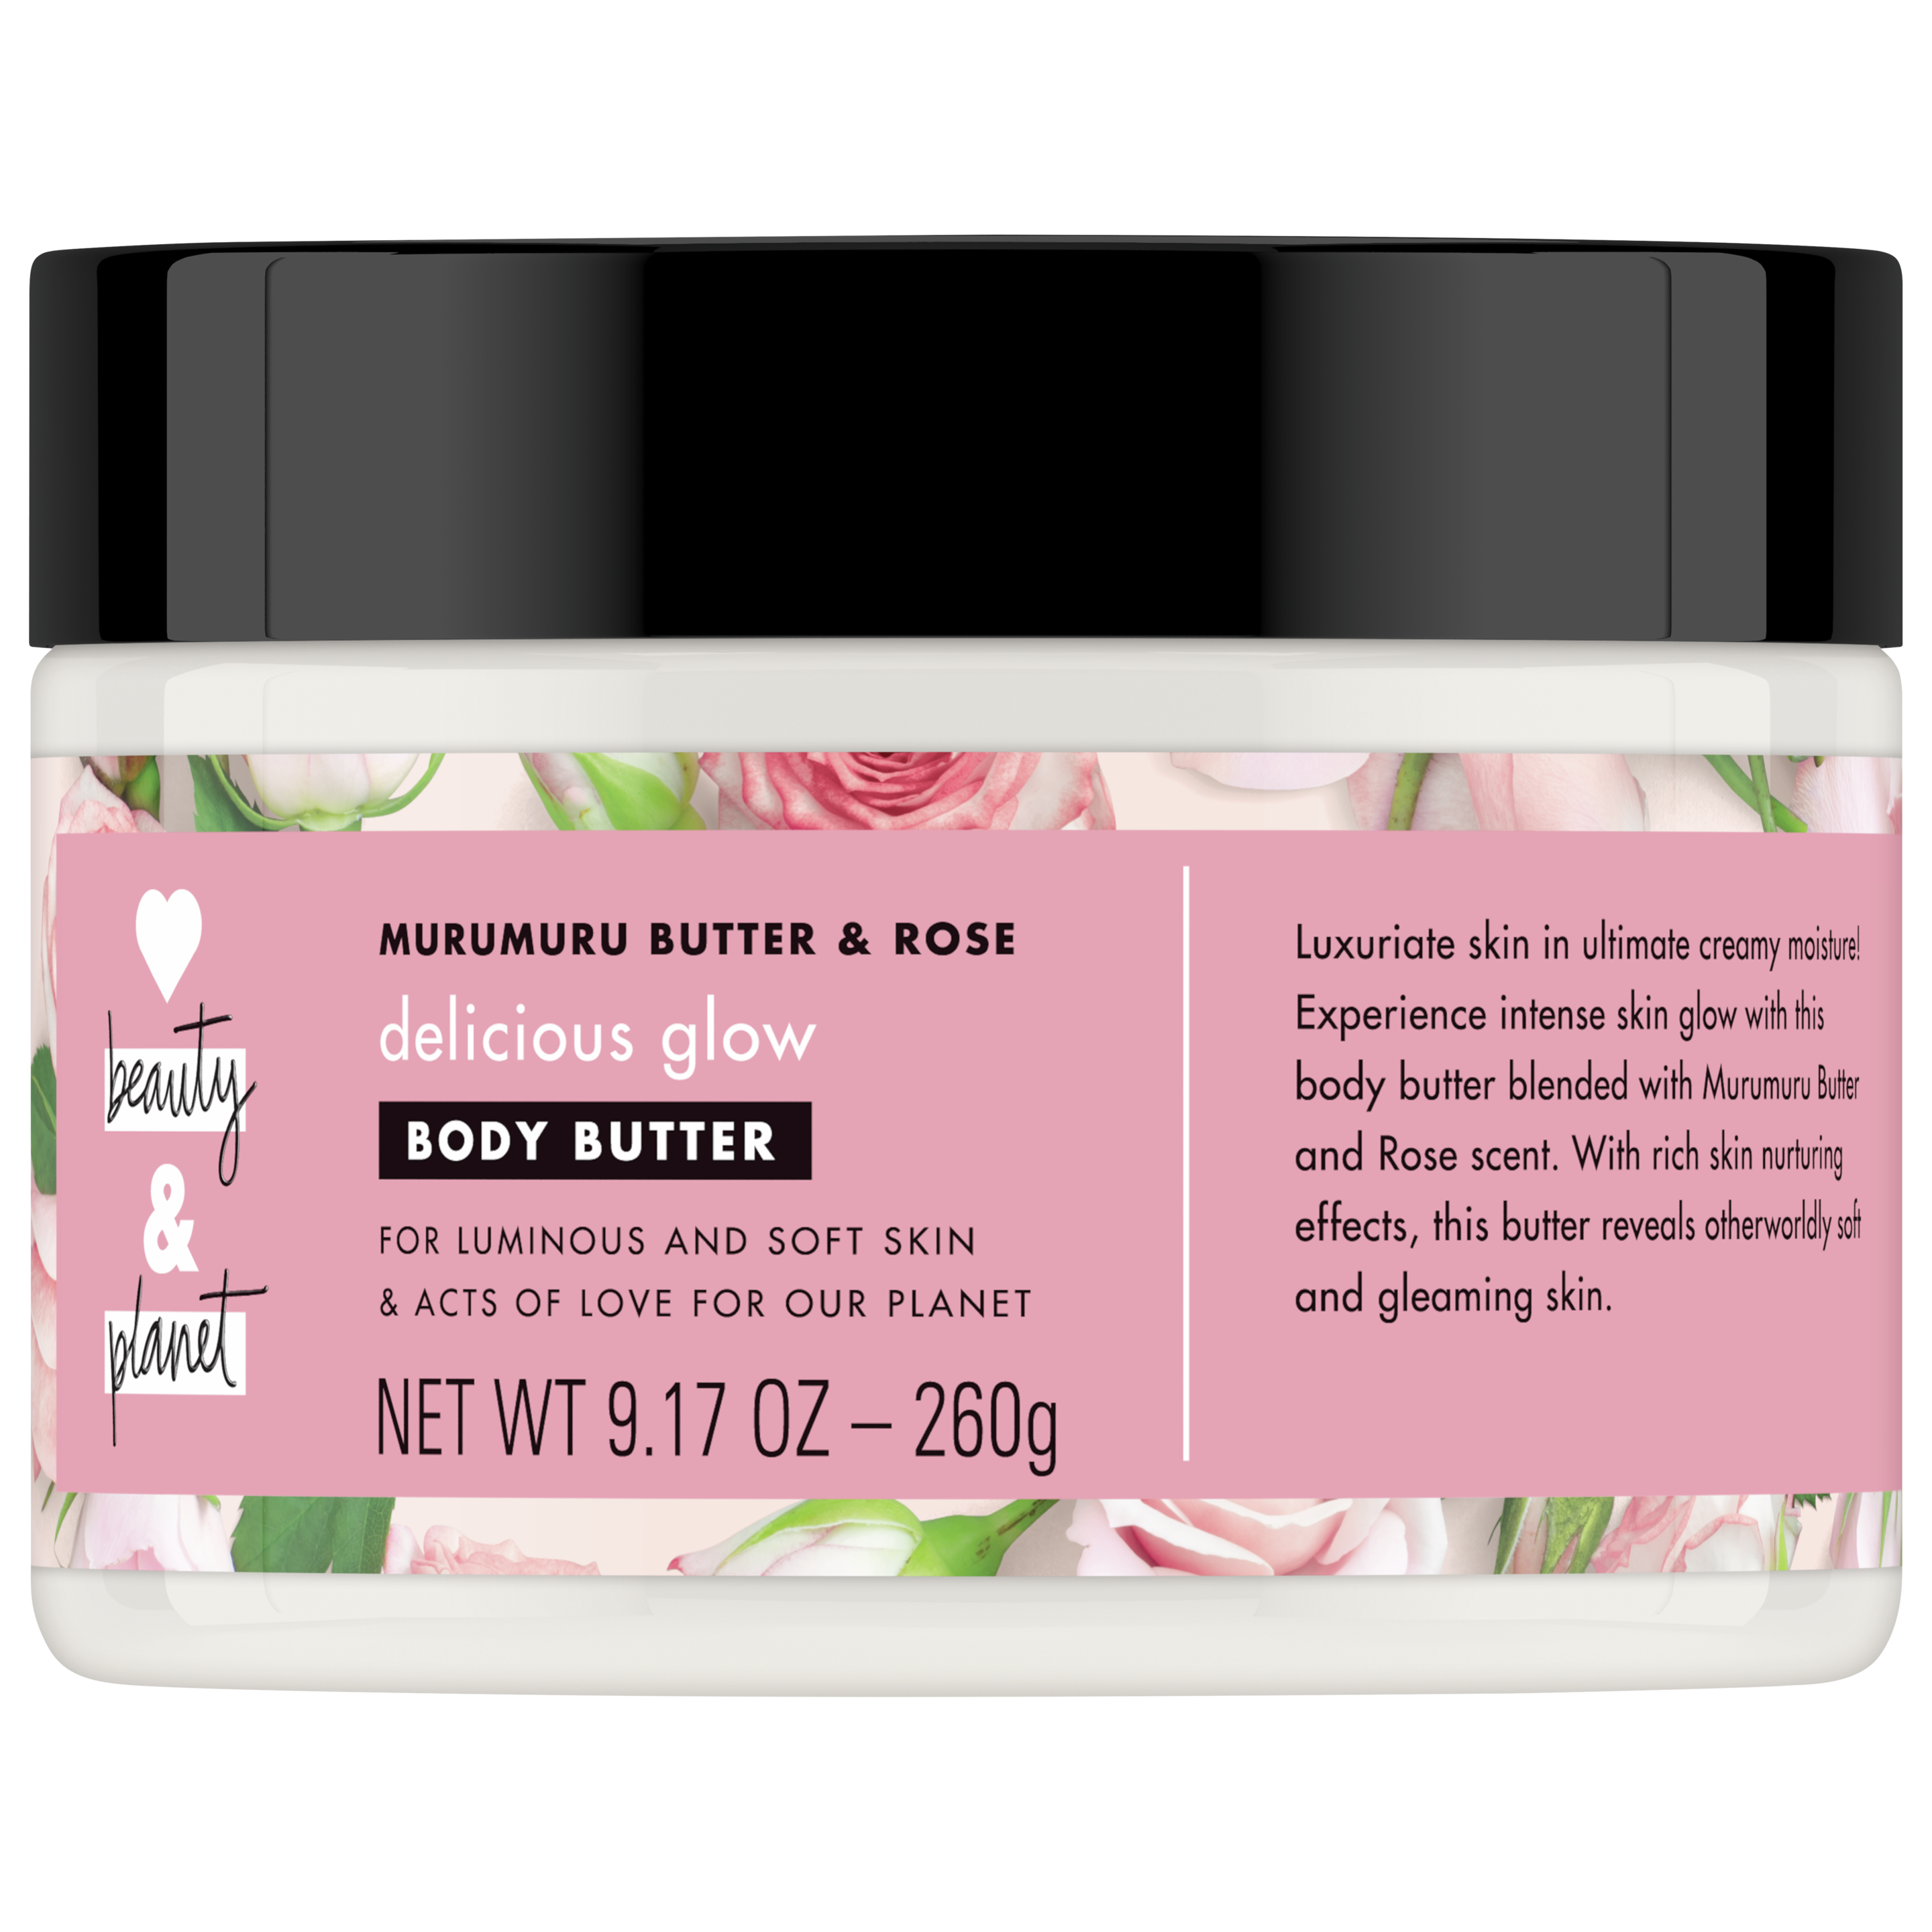 Front of body butter pack Love Beauty Planet Murumuru Butter & Rose Body Butter Delicious Glow 9.17oz